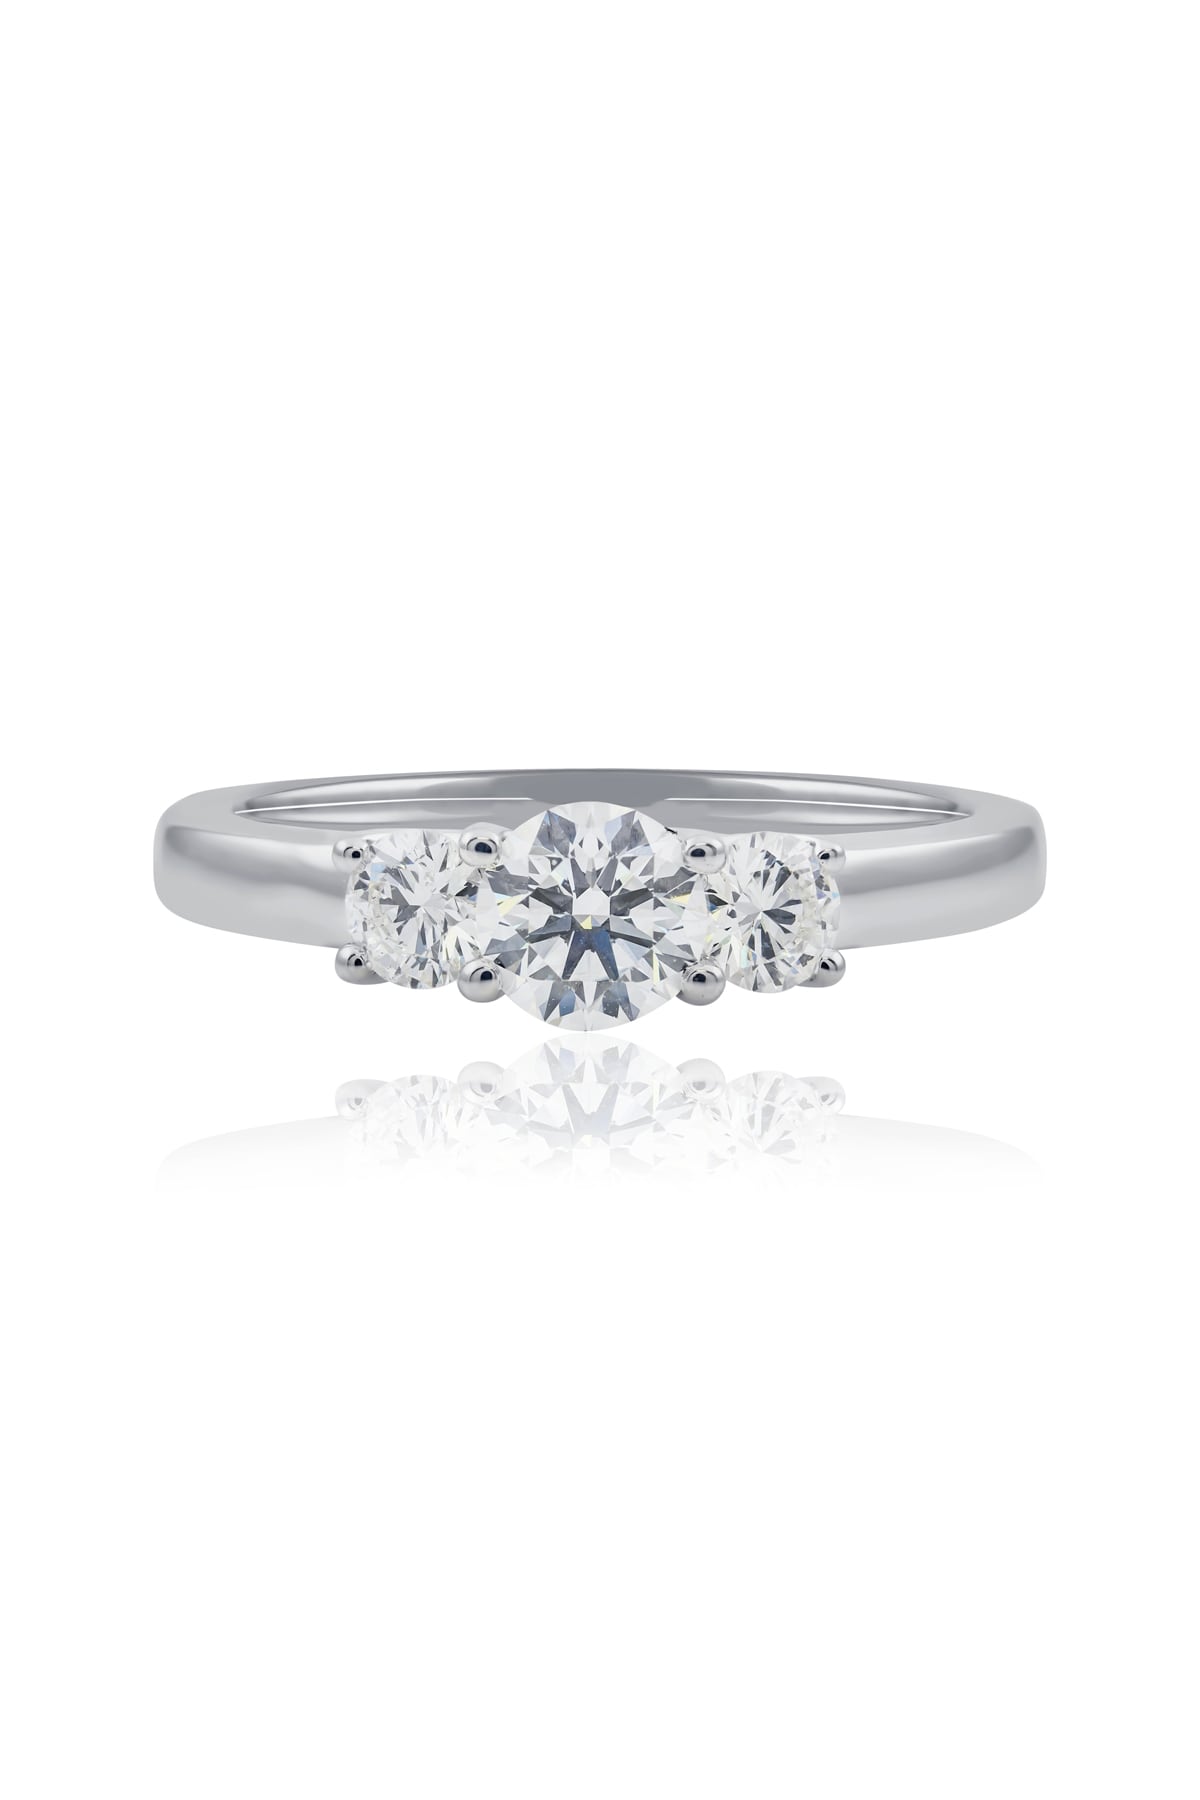 Three Stone Diamond Engagement Ring in White Gold from LeGassick.